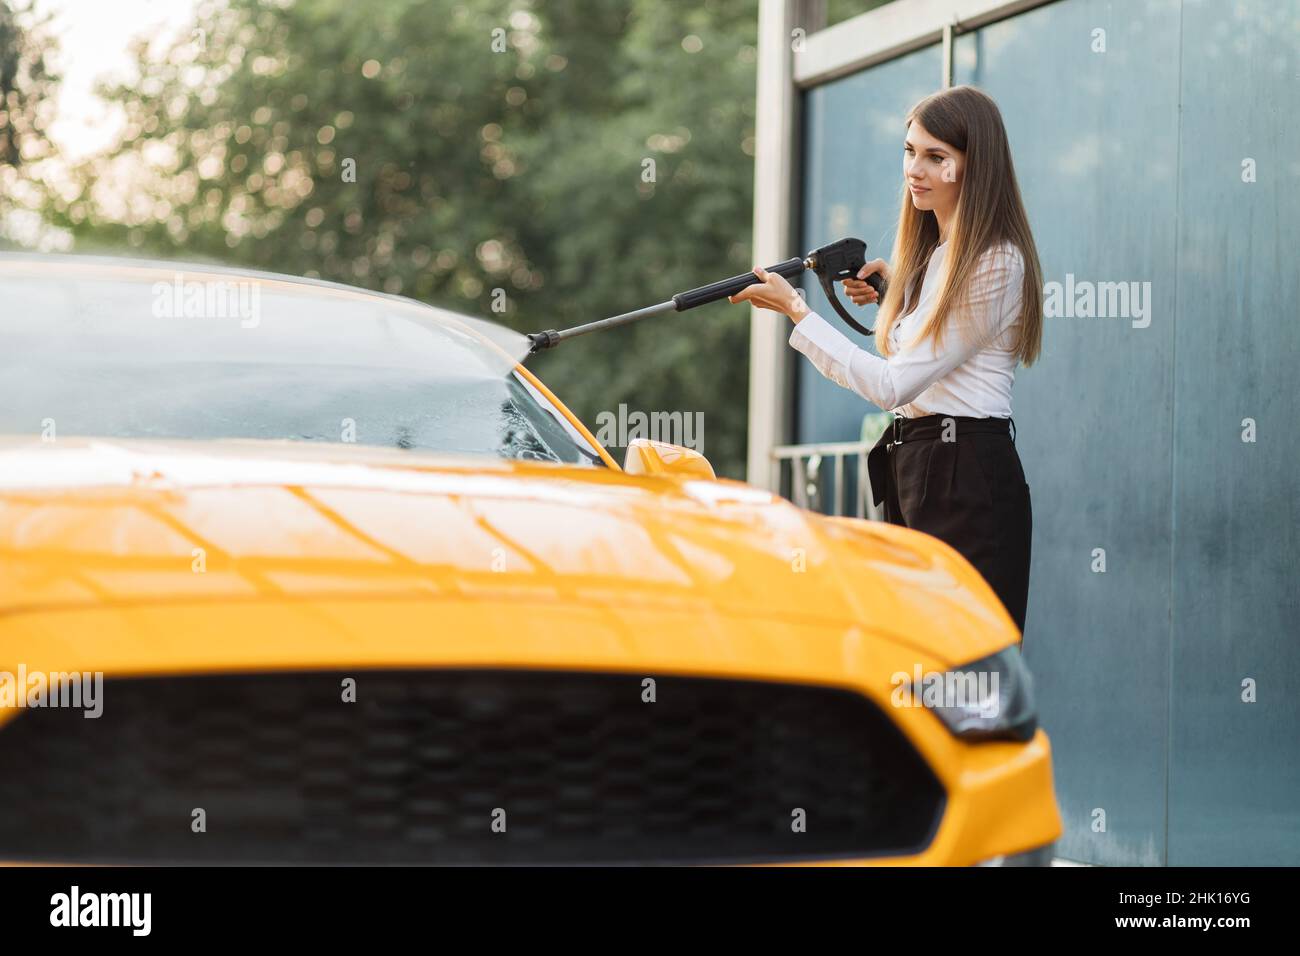 Female person hand with sponge scrubbing vehicle with foam, car wash. Young  woman on self-service automobile washing. Outdoor carwash Stock Photo -  Alamy